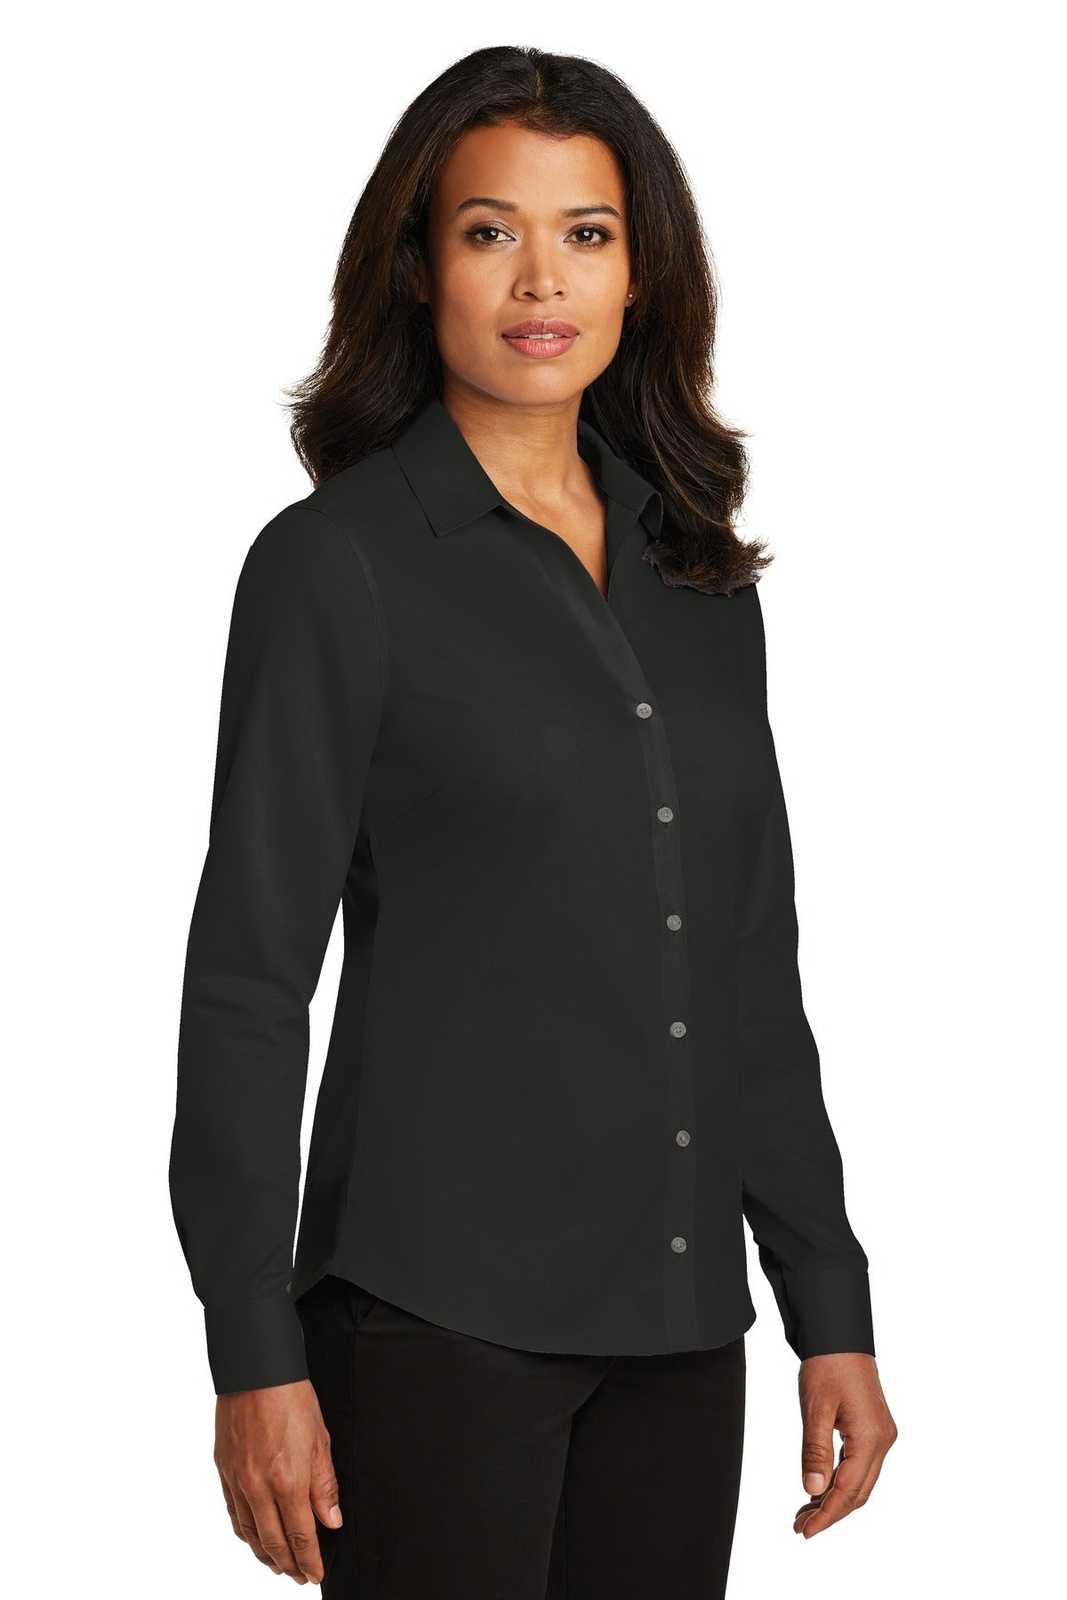 Red House RH79 Ladies Non-Iron Twill Shirt - Black - HIT a Double - 4